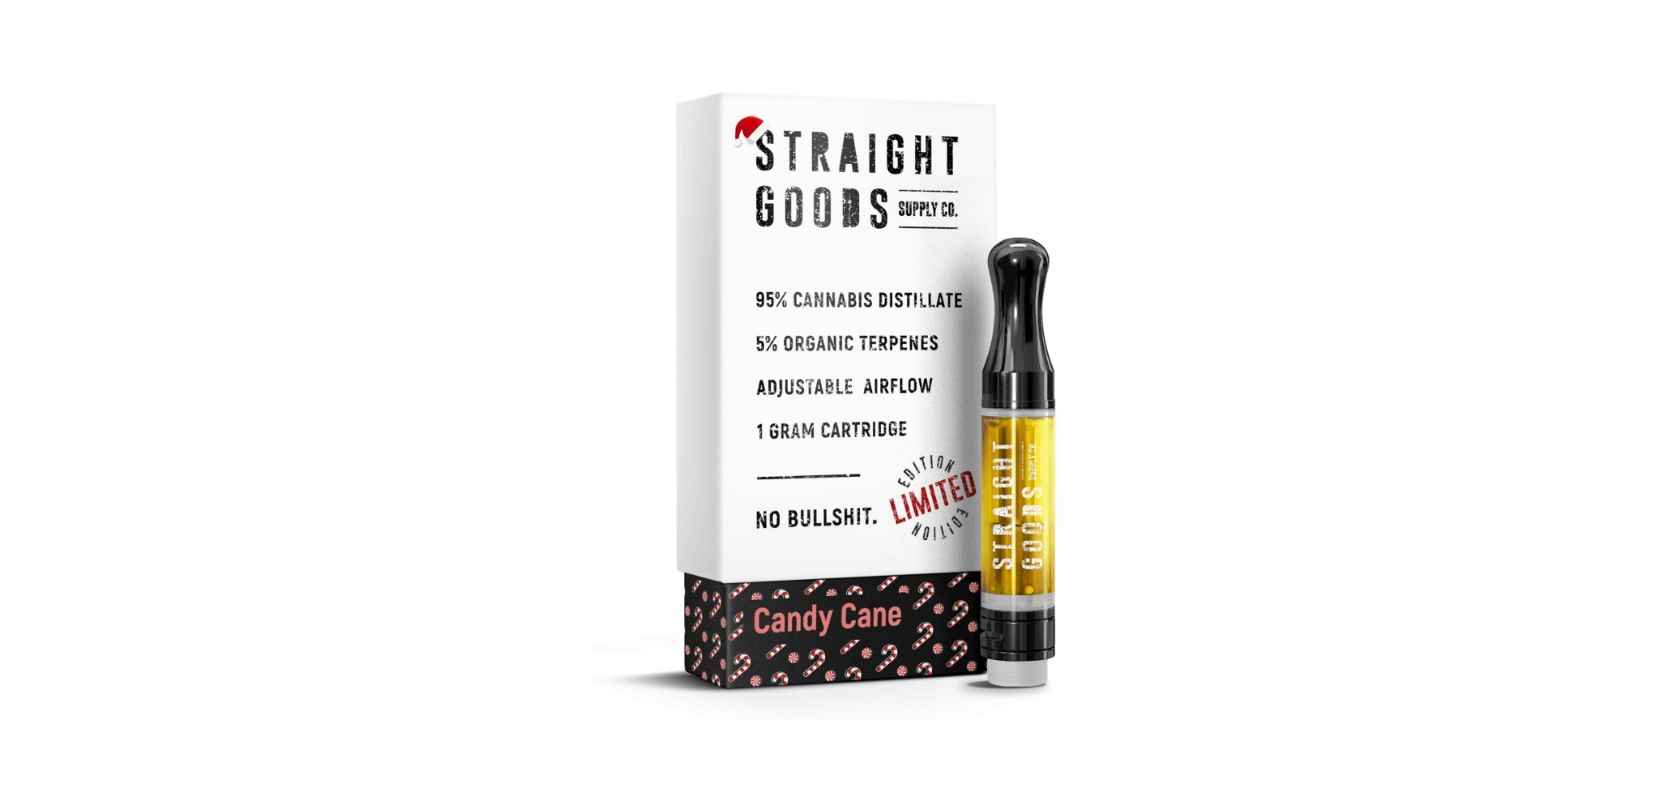 You should probably try Straight Goods’ Candy Cane Cart if you’re looking for a vape cart that will have you nodding off after just a few hits.